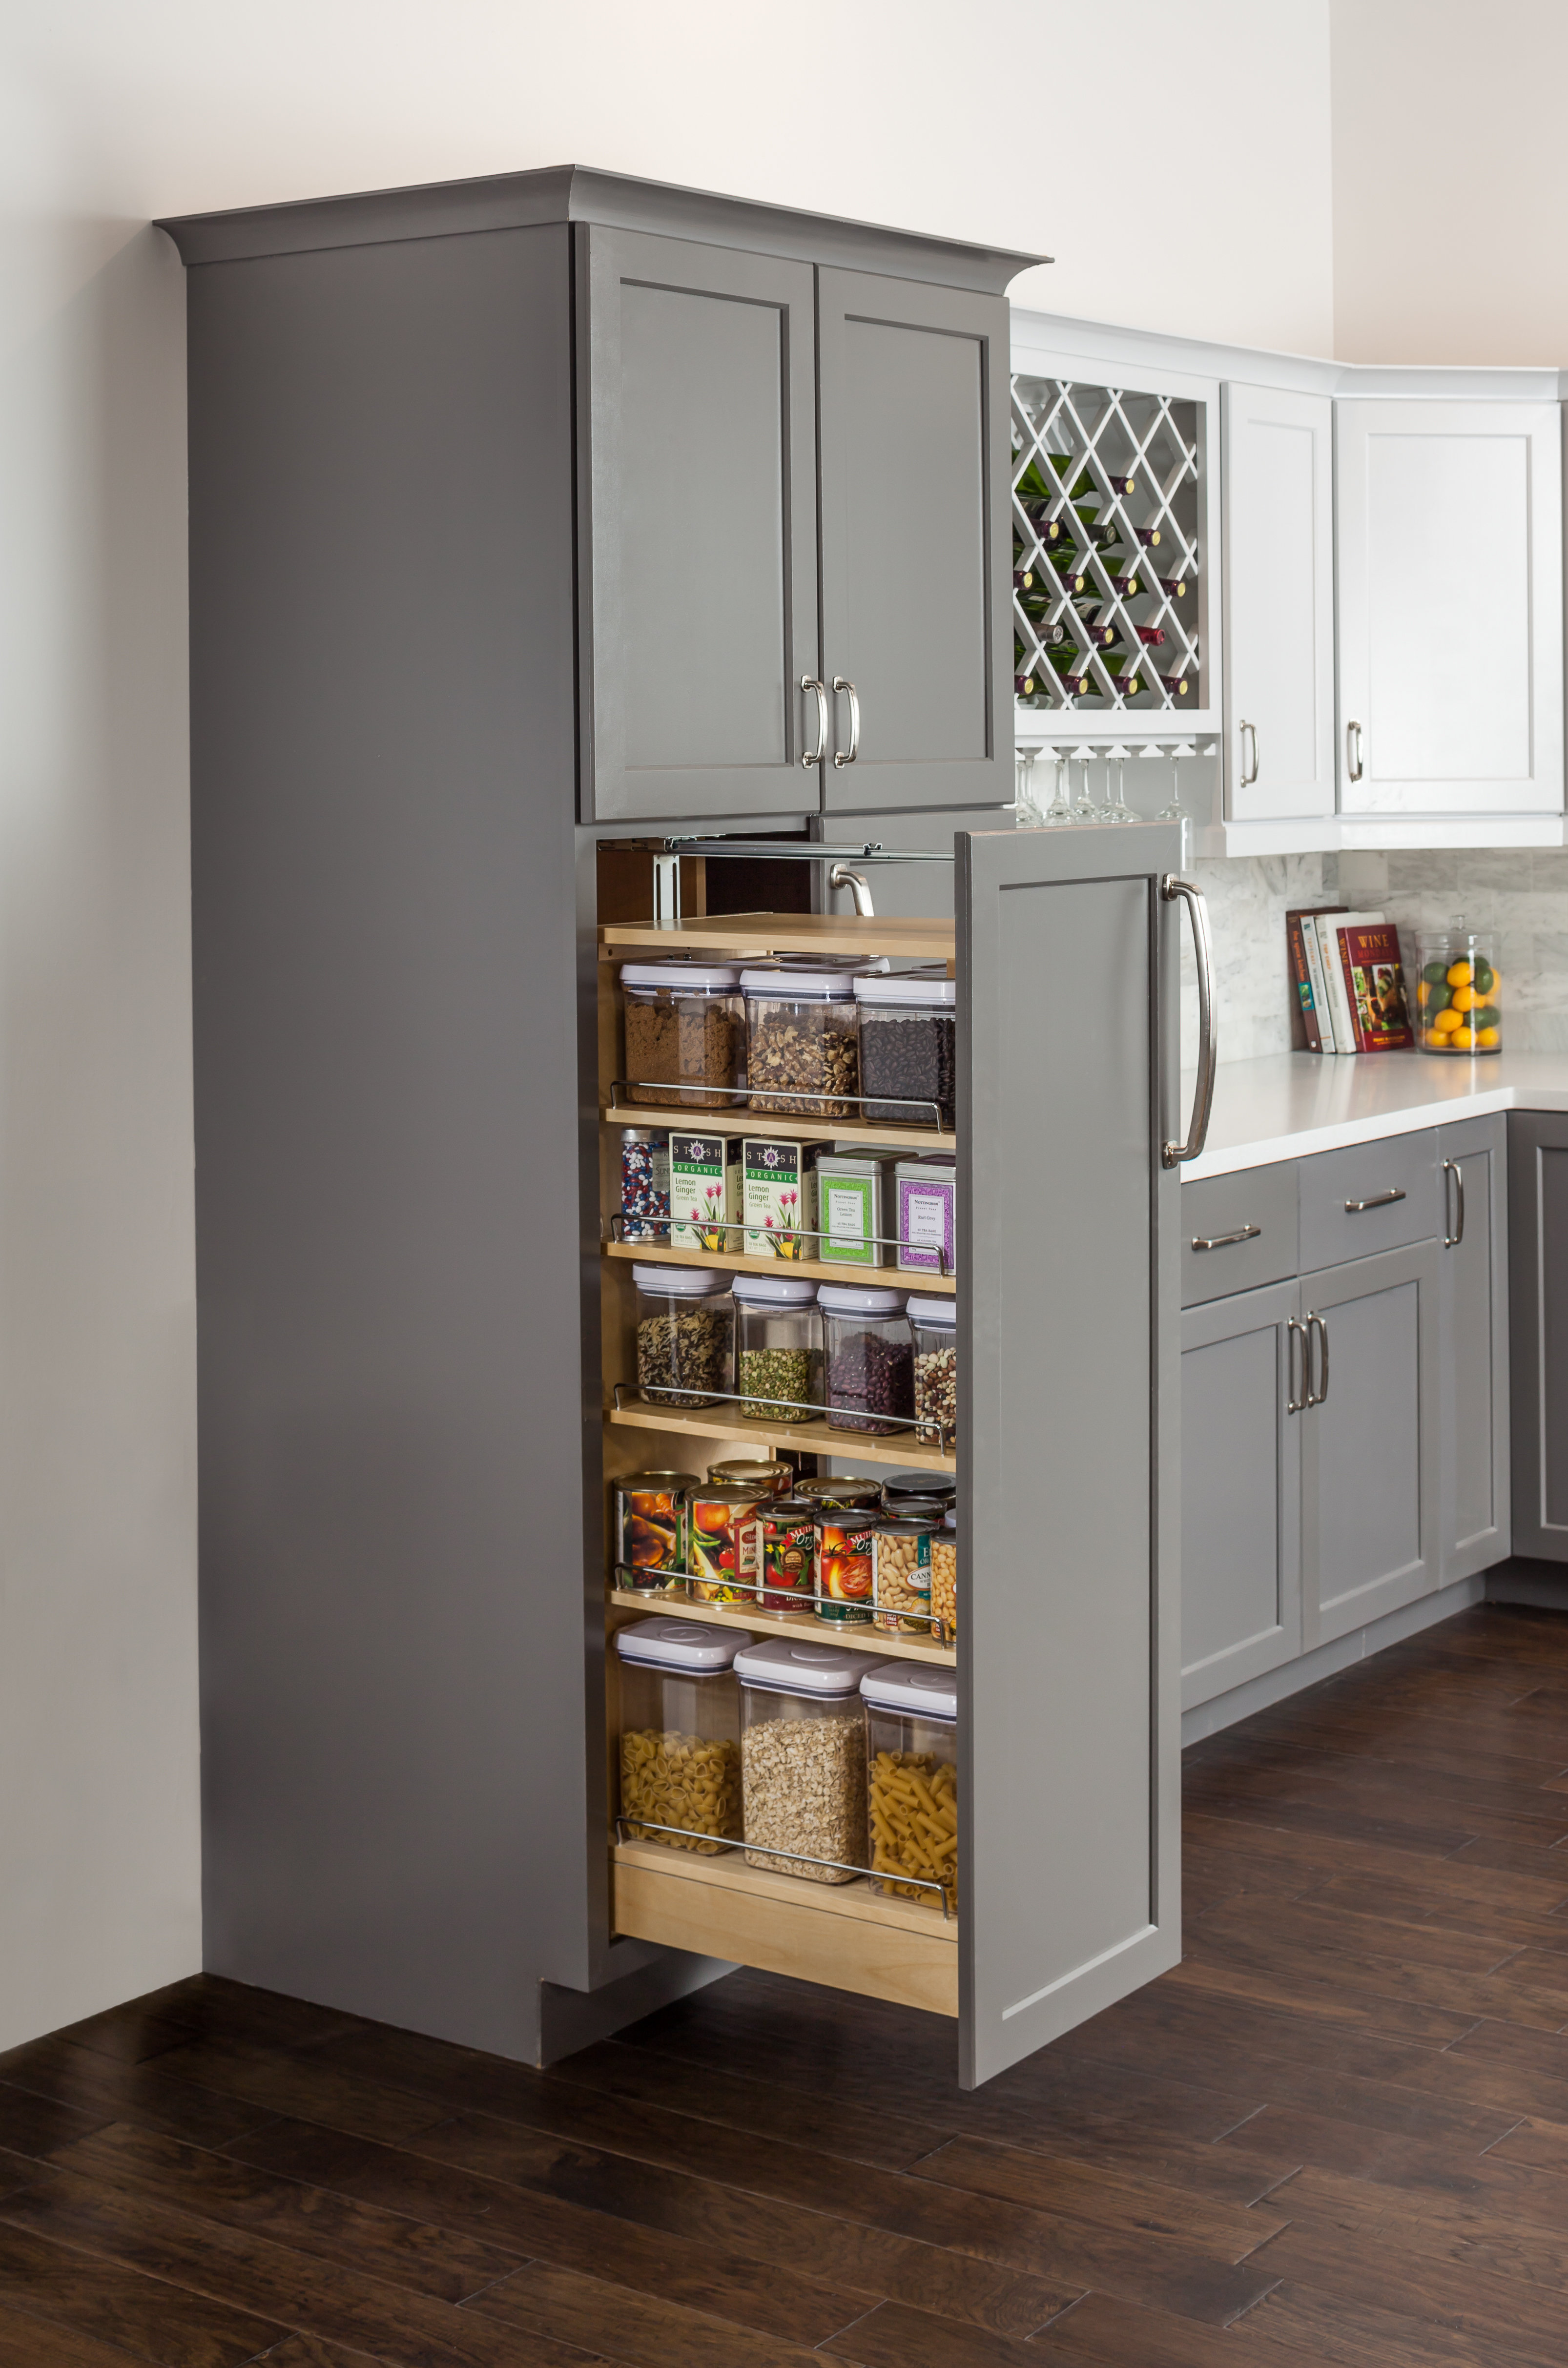 New Kitchen Storage Cabinets With Doors And Pull Out Shelves for Simple Design